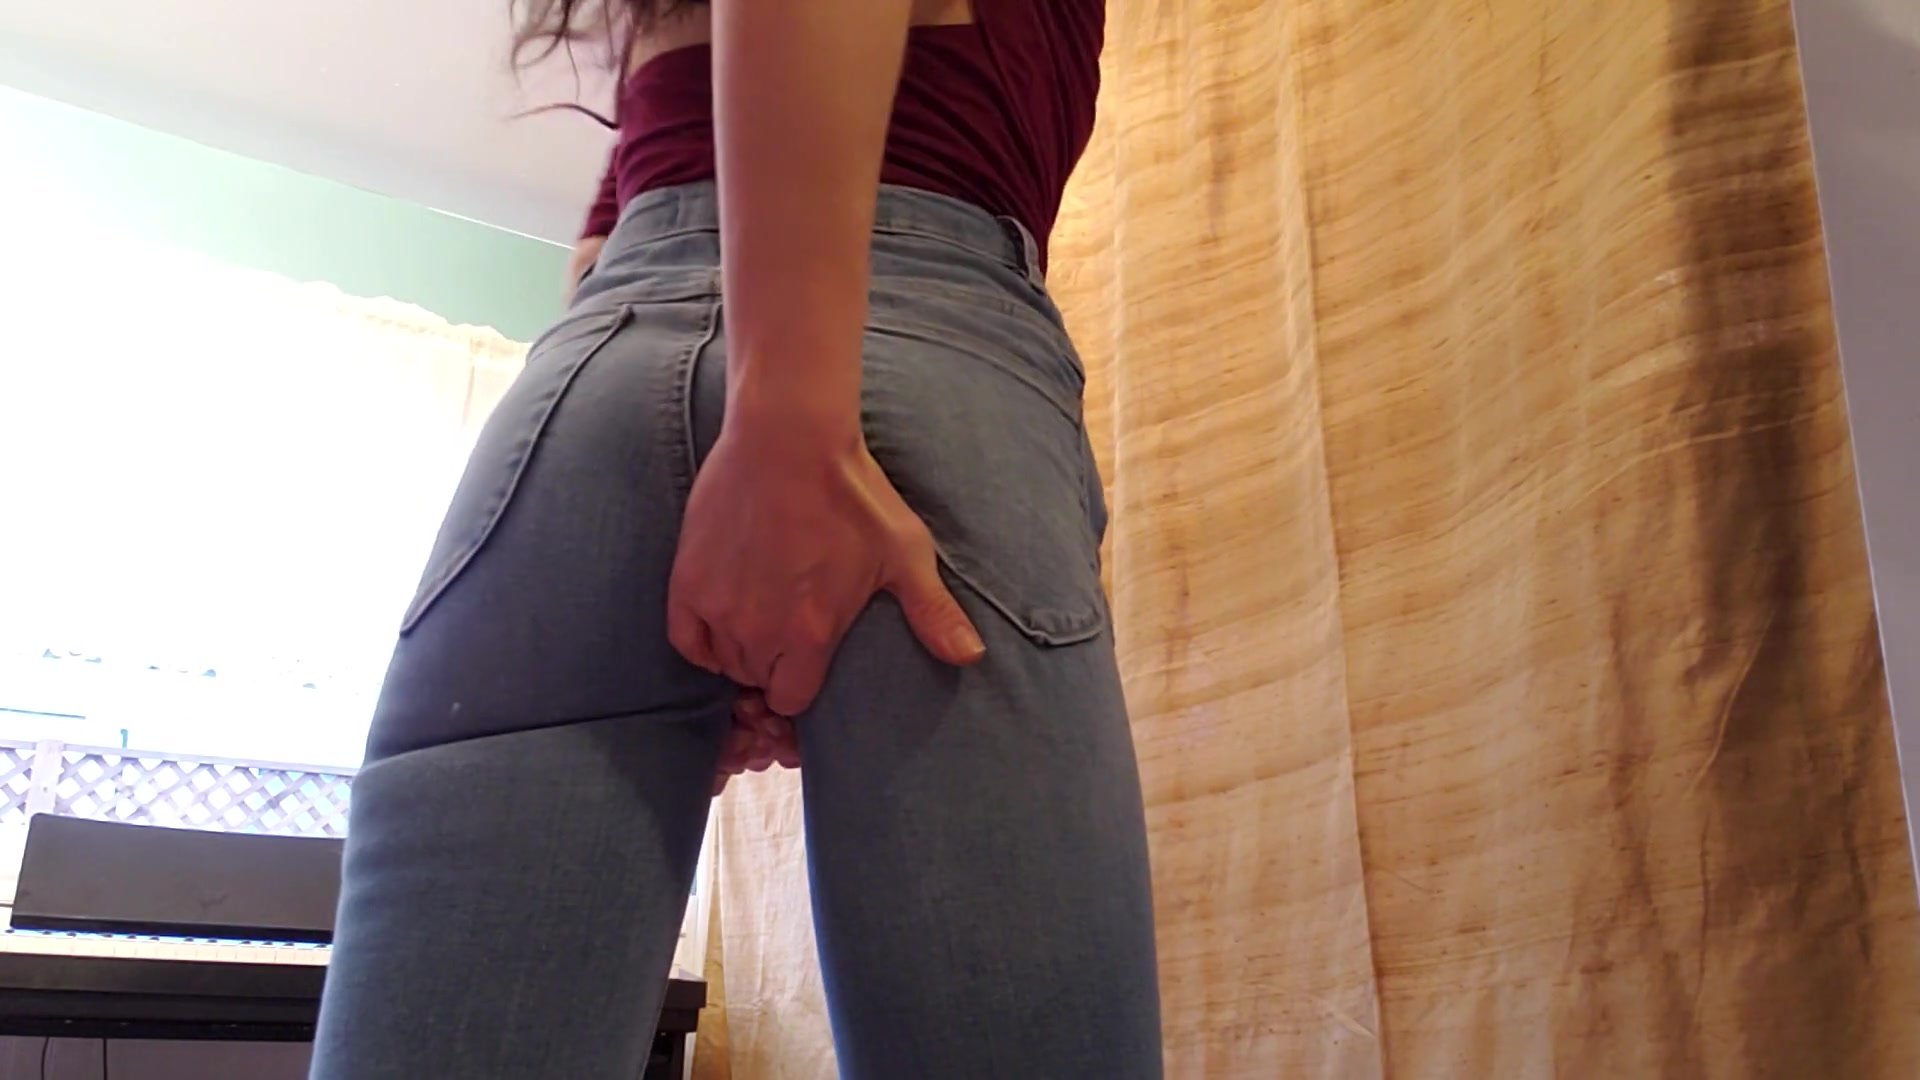 Jeans pissing #2